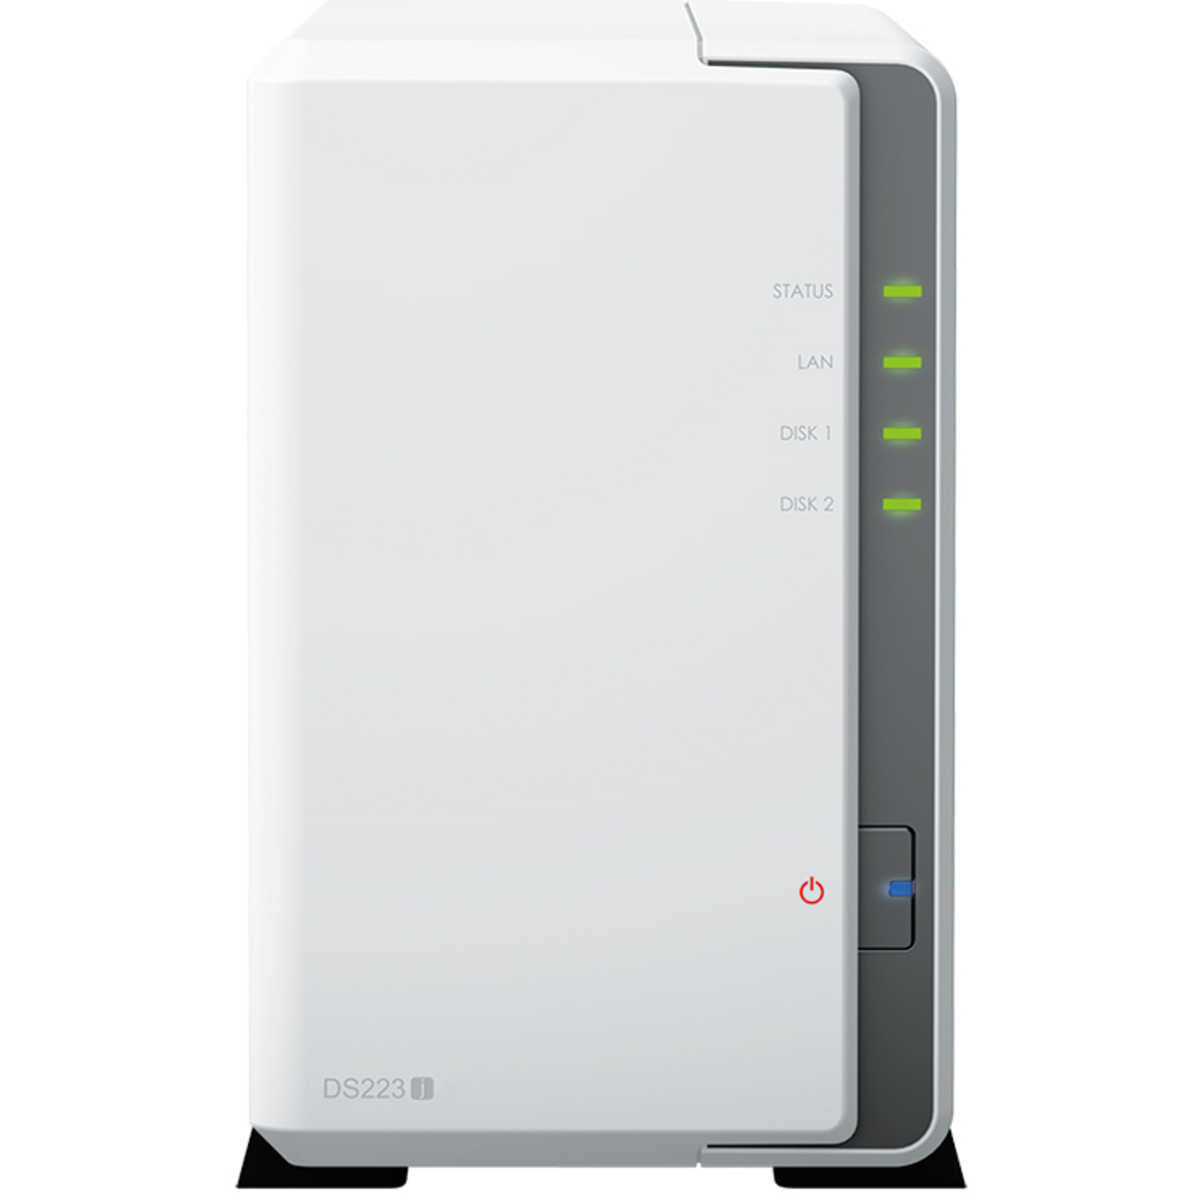 Synology DiskStation DS223j 18tb 2-Bay Desktop Personal / Basic Home / Small Office NAS - Network Attached Storage Device 1x18tb Synology HAT5310 Series HAT5310-18T 3.5 7200rpm SATA 6Gb/s HDD ENTERPRISE Class Drives Installed - Burn-In Tested DiskStation DS223j